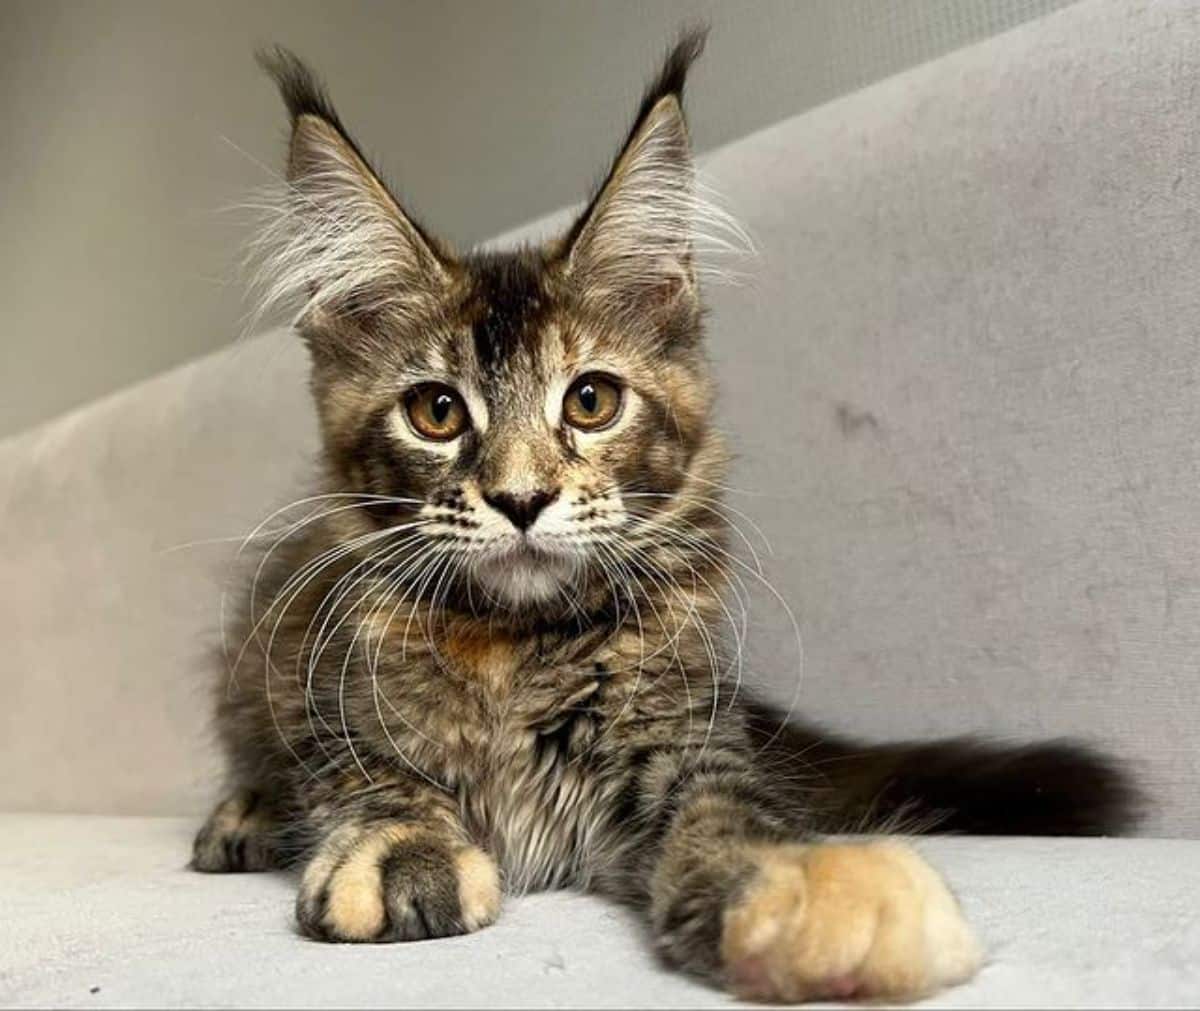 A tabby maine coon kitten lying on a couch.